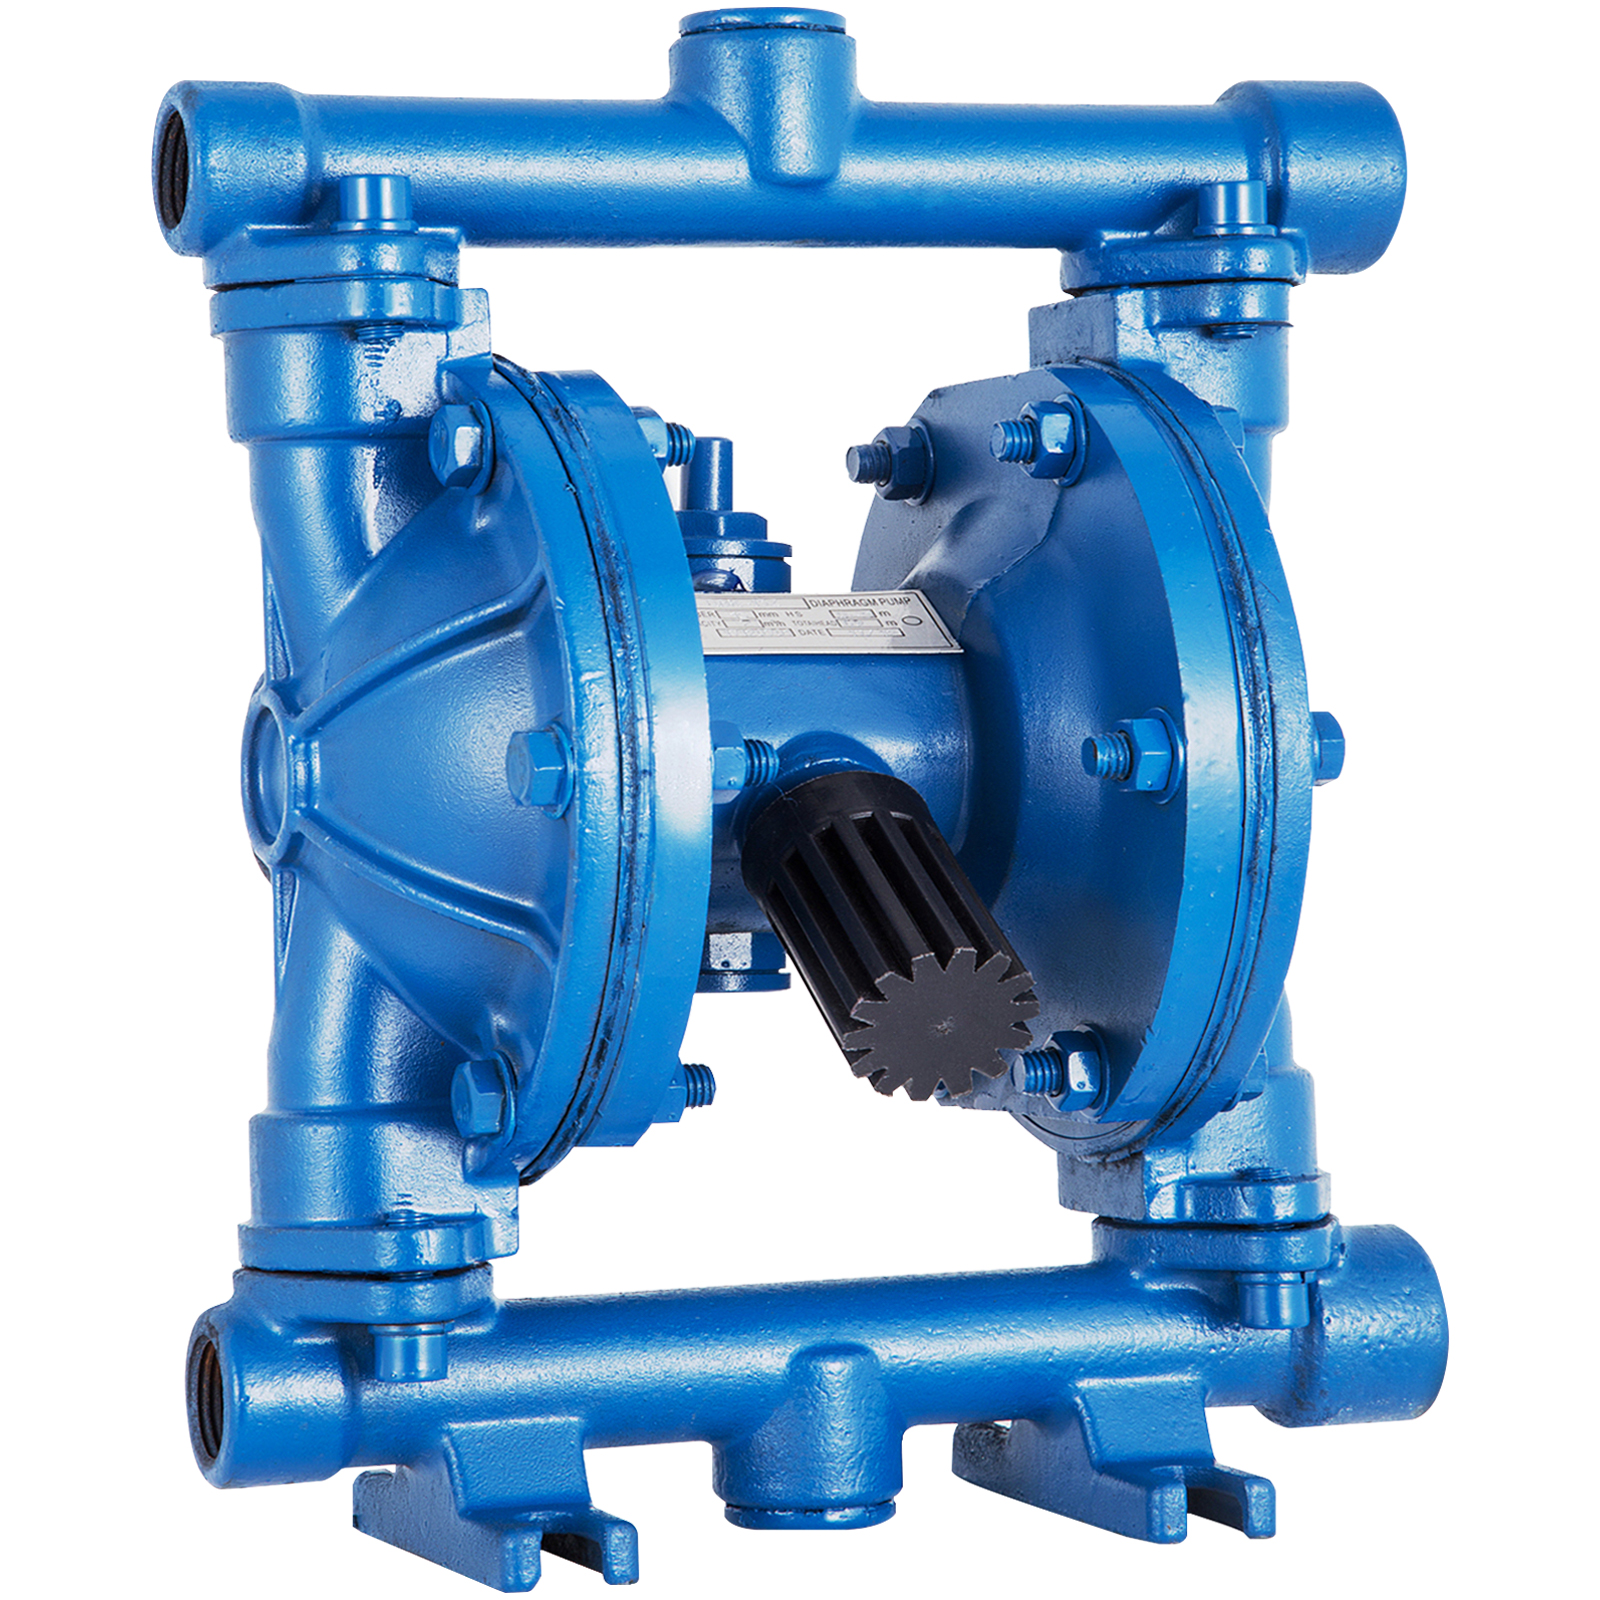 Air-Operated Double Diaphragm Pump 1/2" Inlet Outlet Cast iron 12GPM QBK-15-1/2 от Vevor Many GEOs